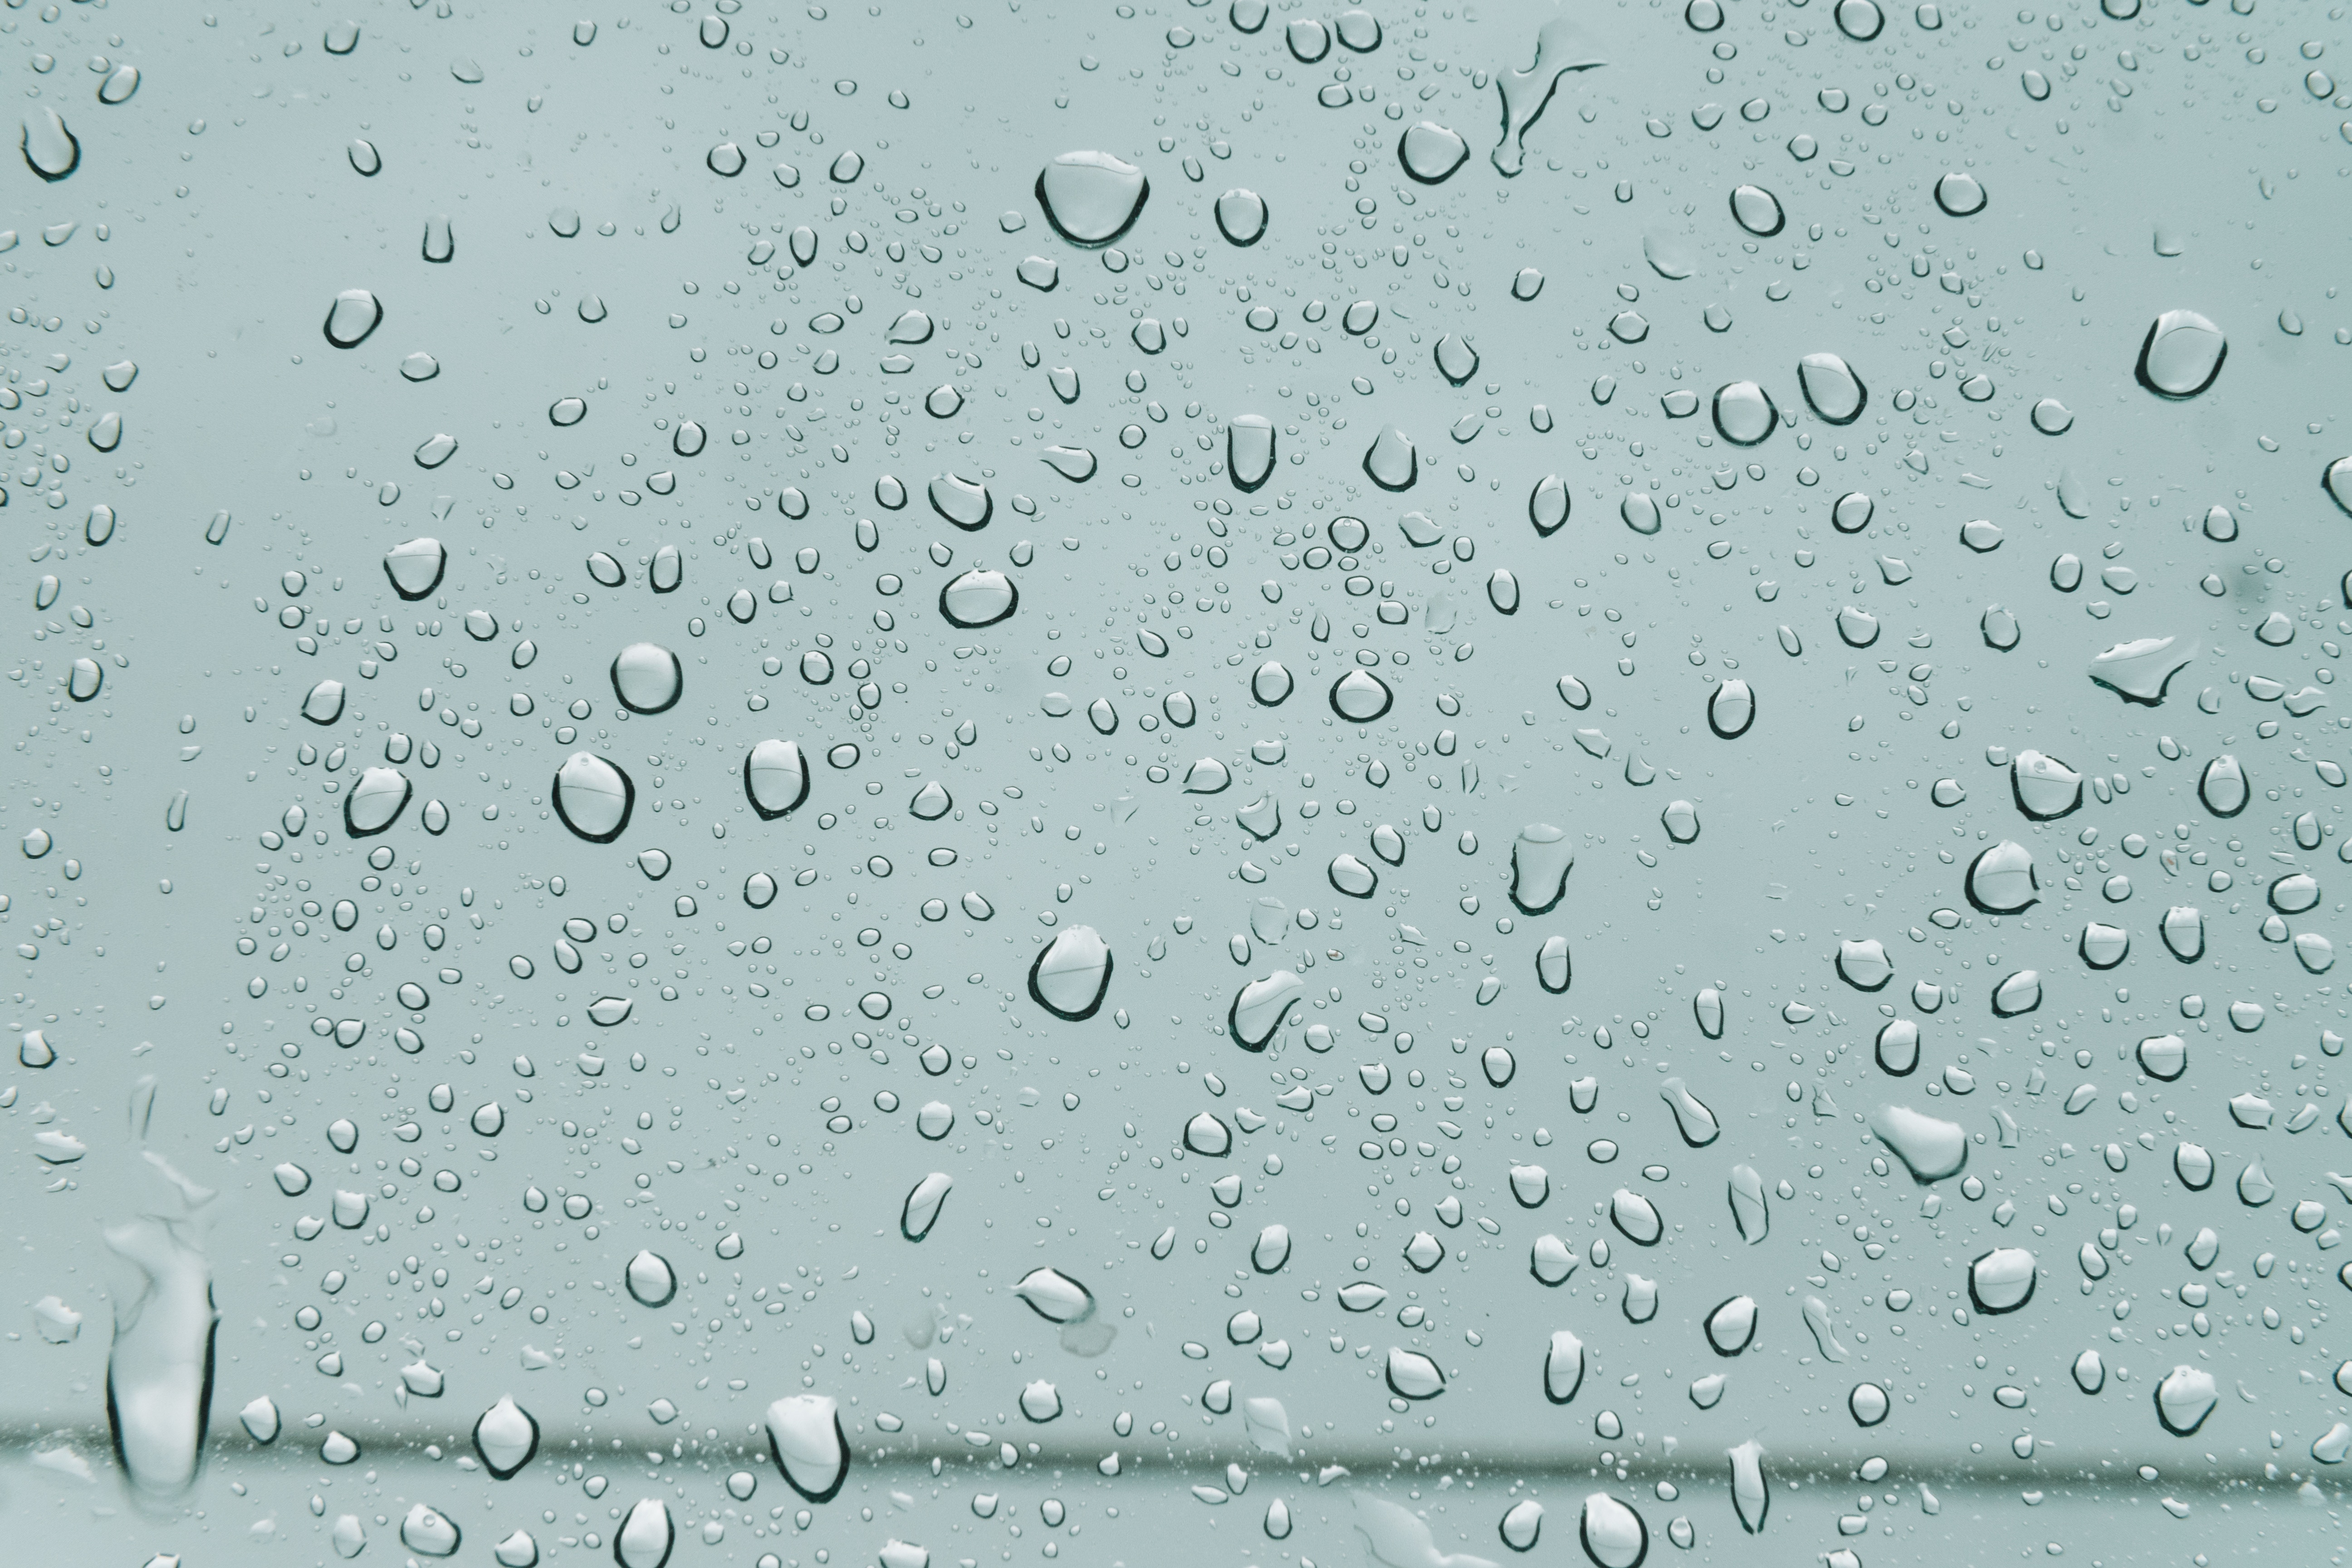 surface, form, forms, rain, drops, macro, wet, moisture, humid lock screen backgrounds